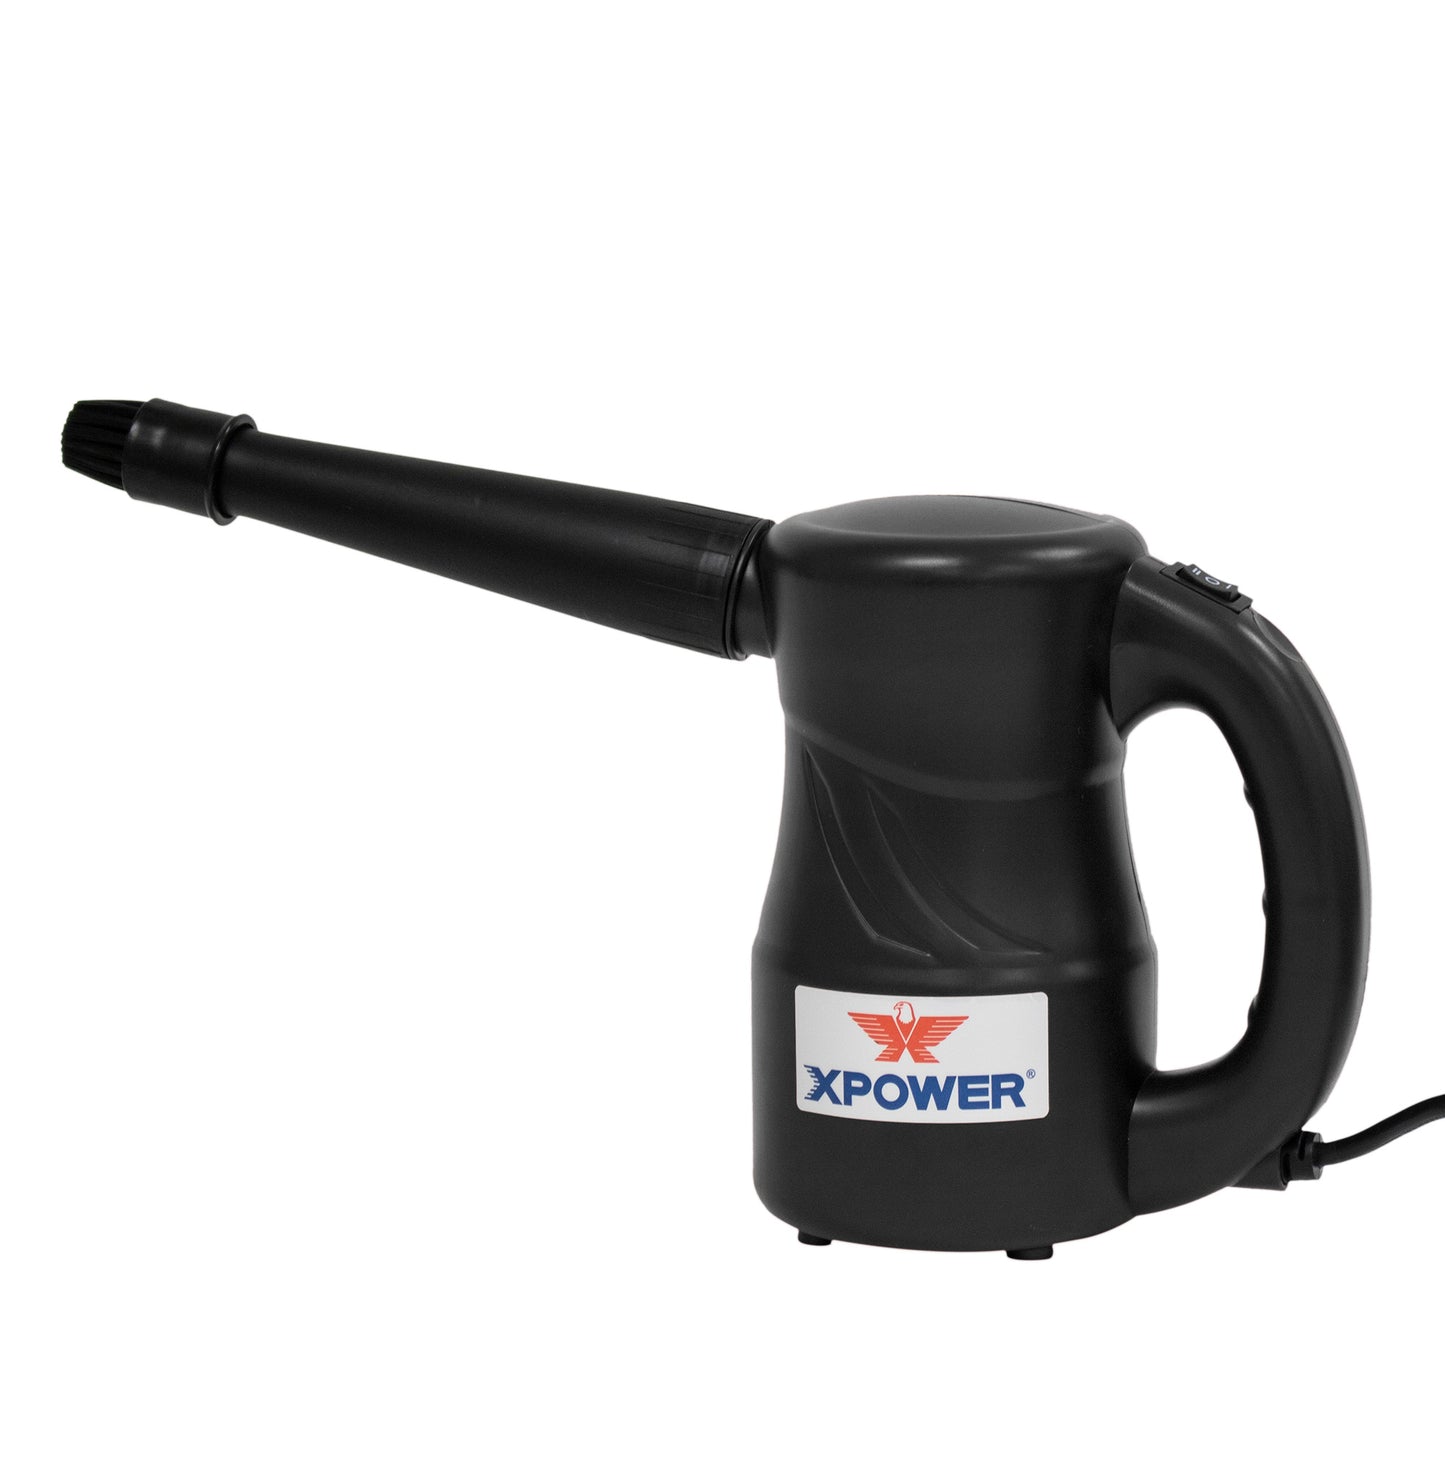 XPOWER A-2S Electric Duster & Blower (Black)